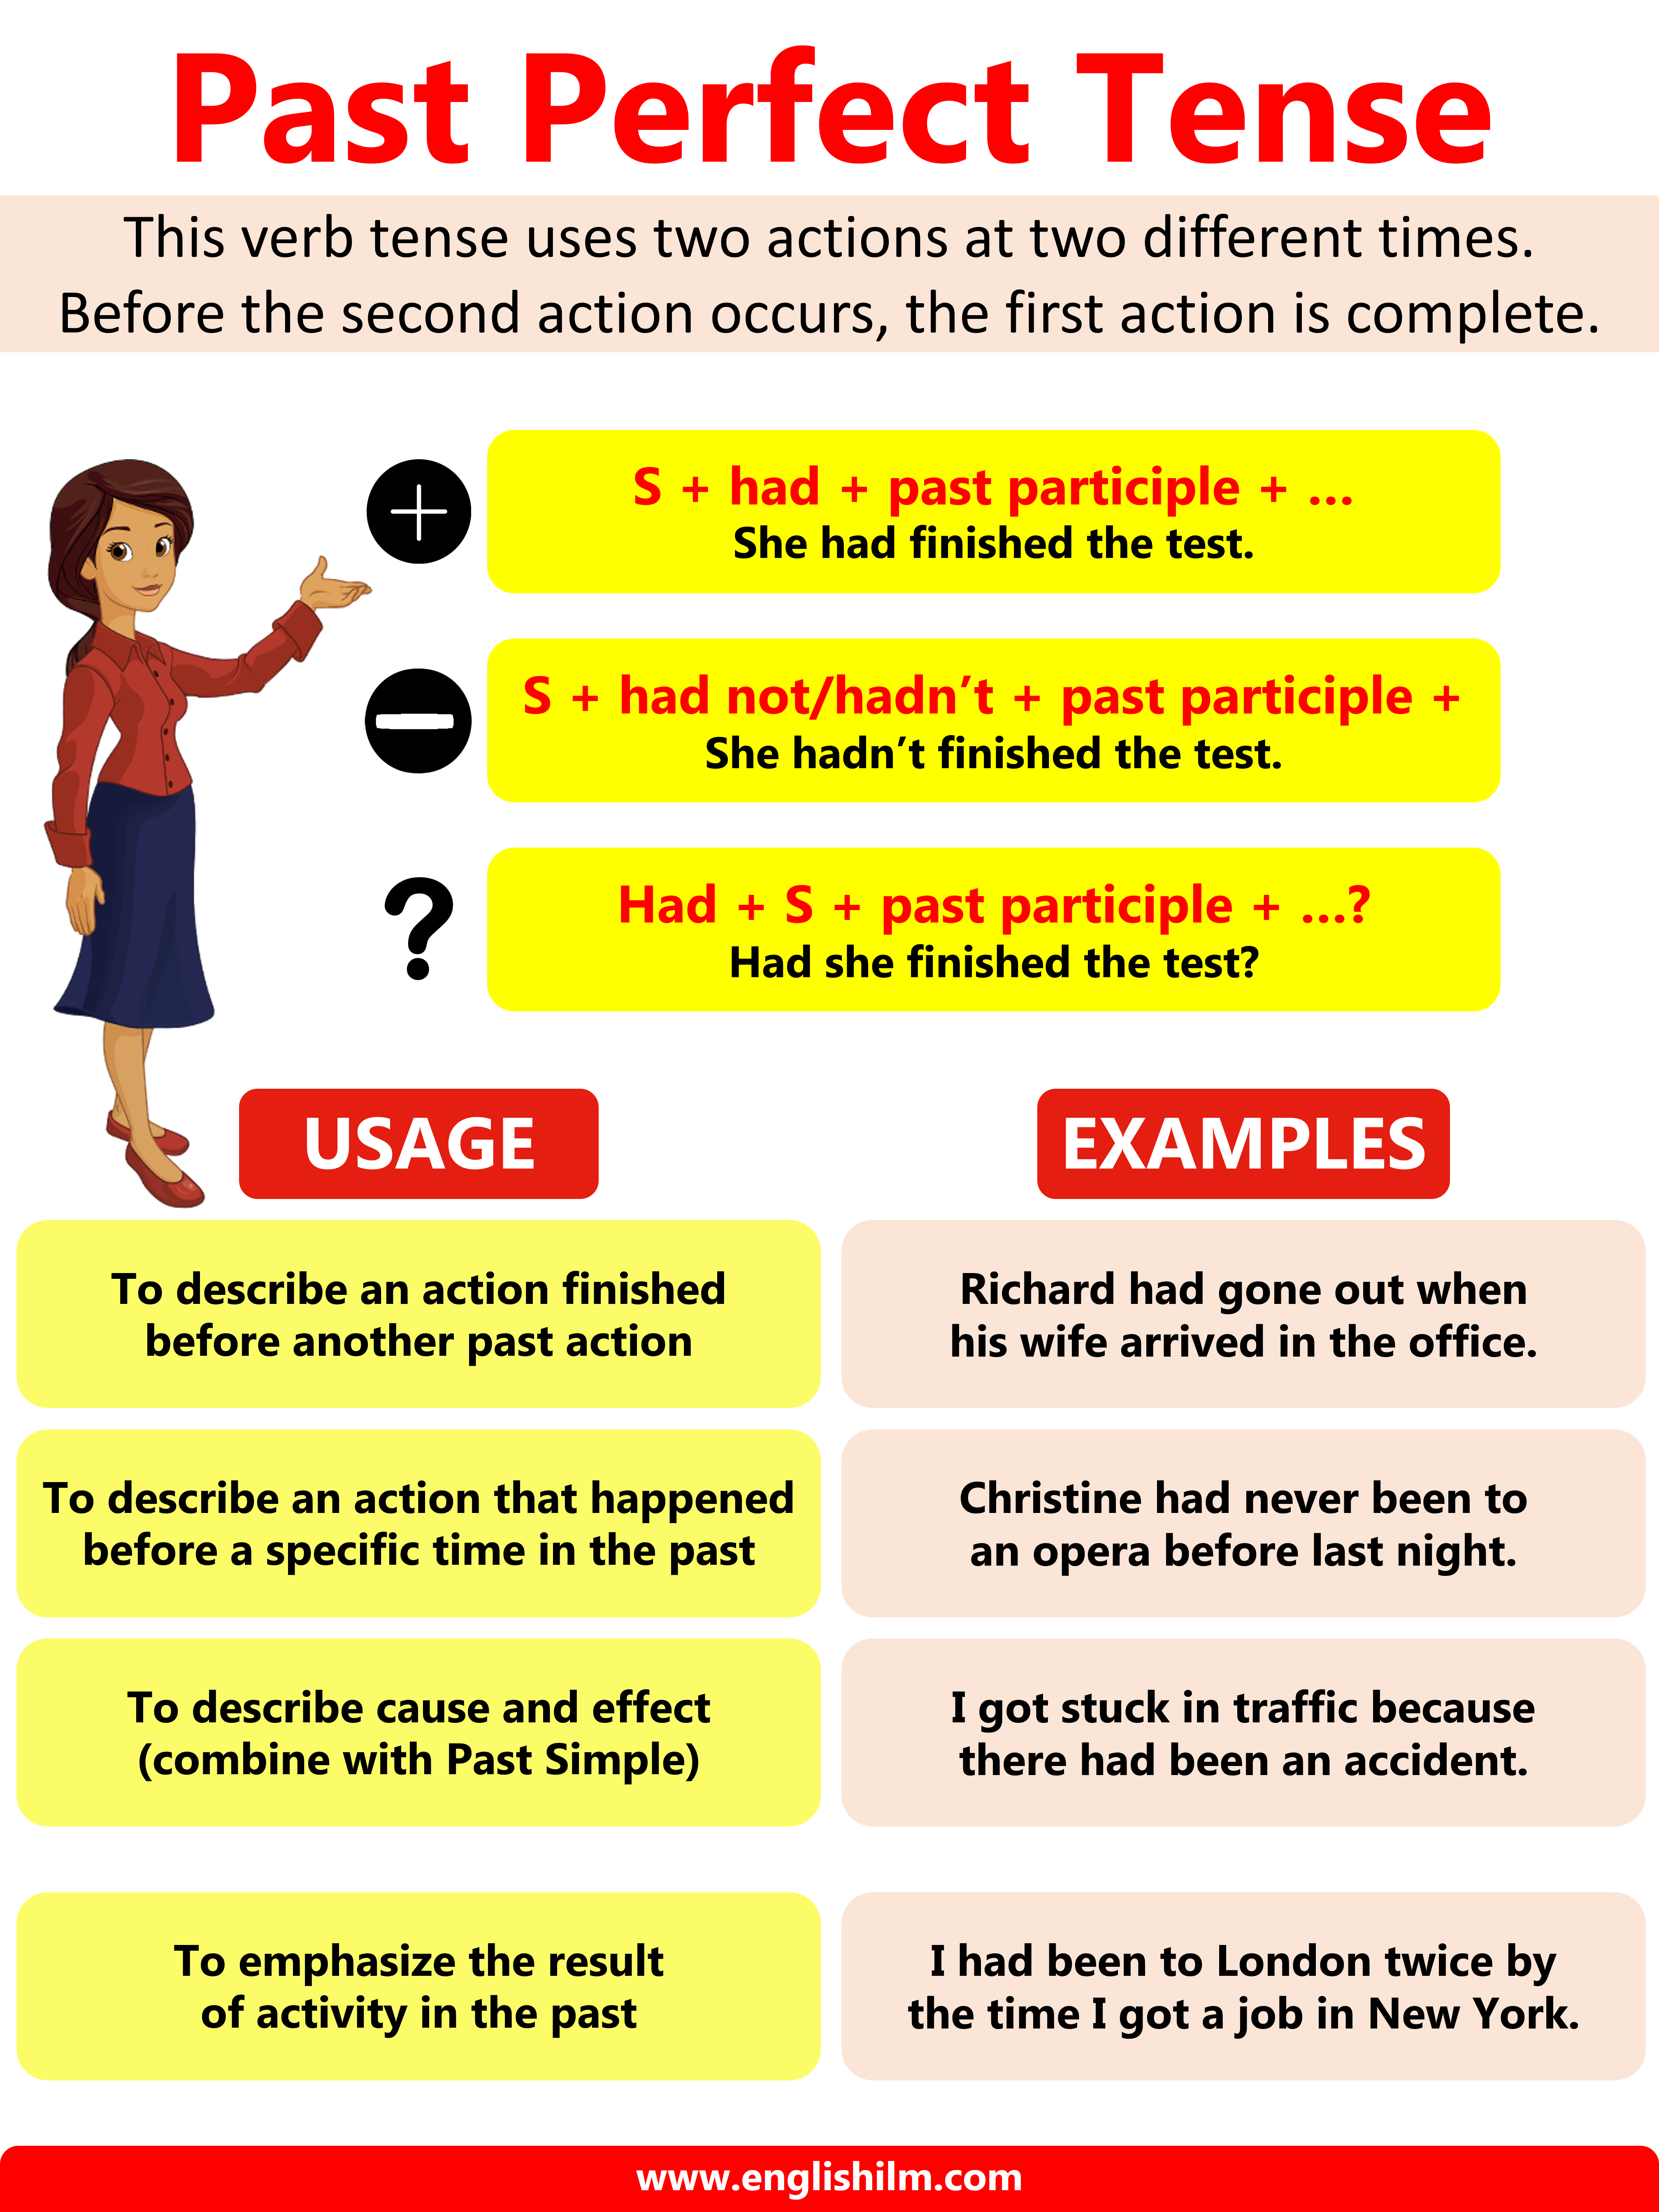 Past Perfect Tense: Definition, Rules and Useful Examples